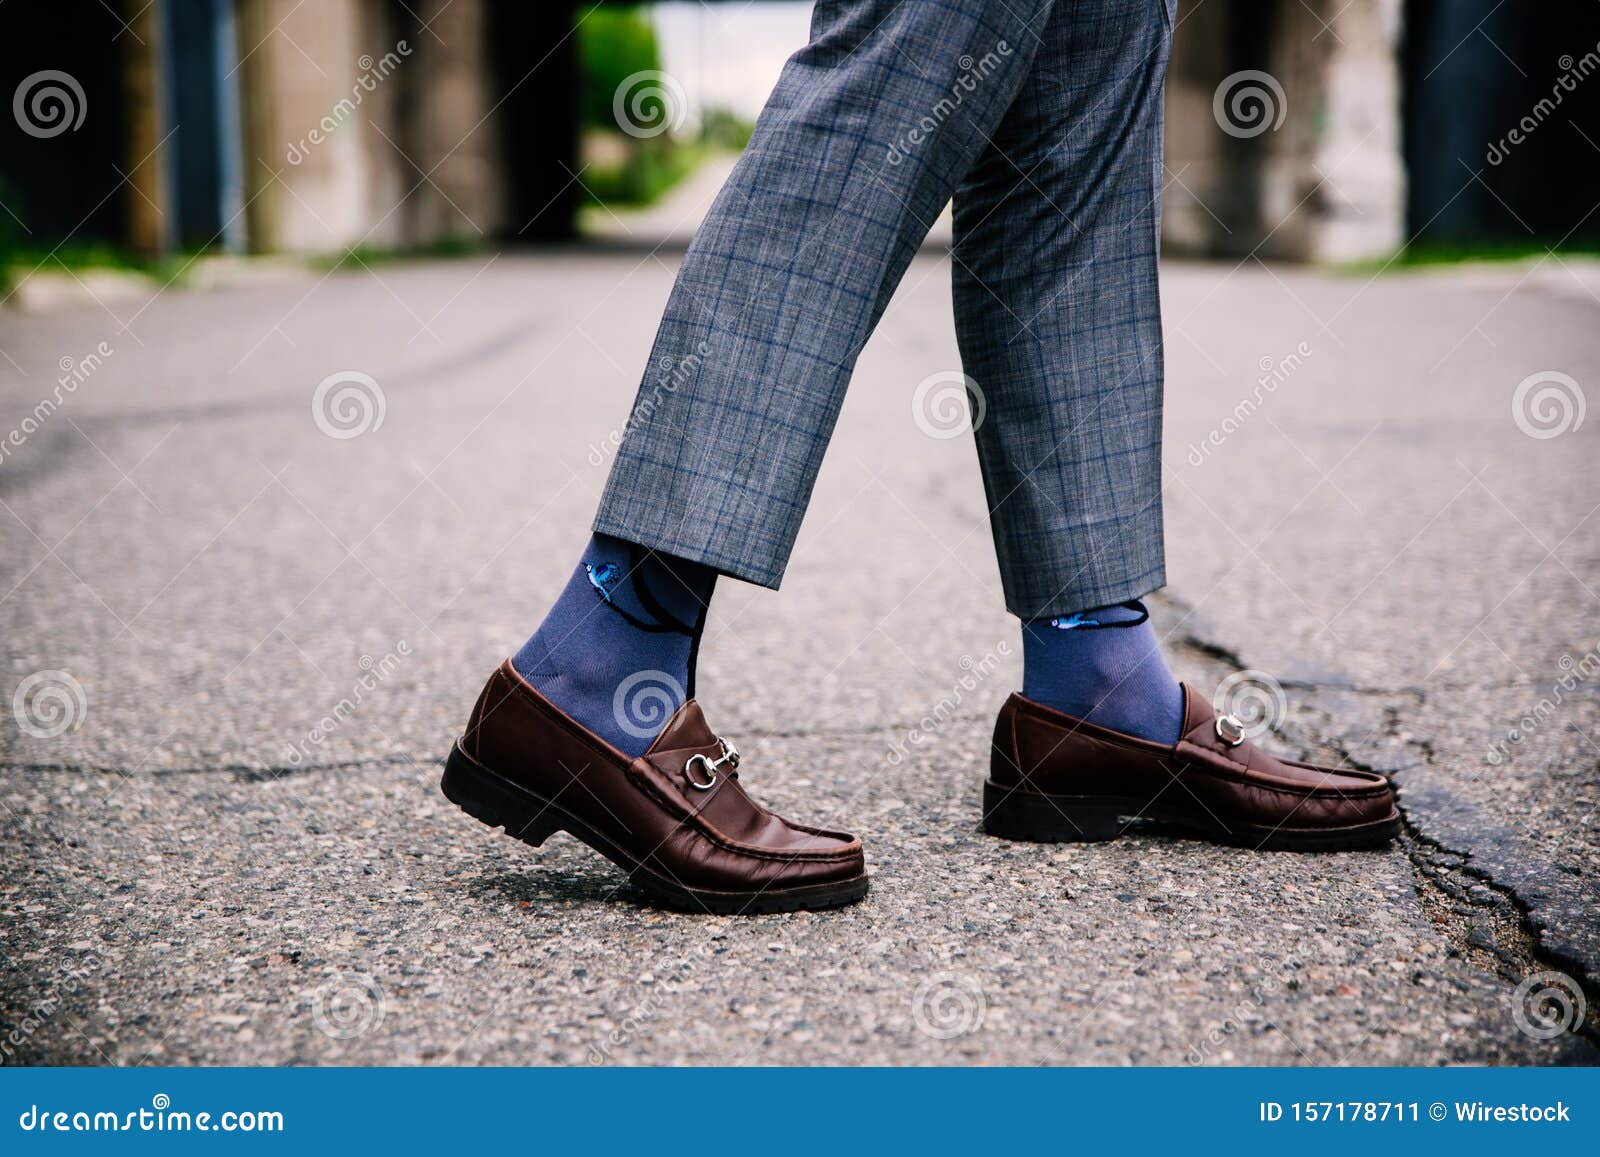 Selective Closeup Shot of a Person Wearing Blue Pants and Brown Shoes ...